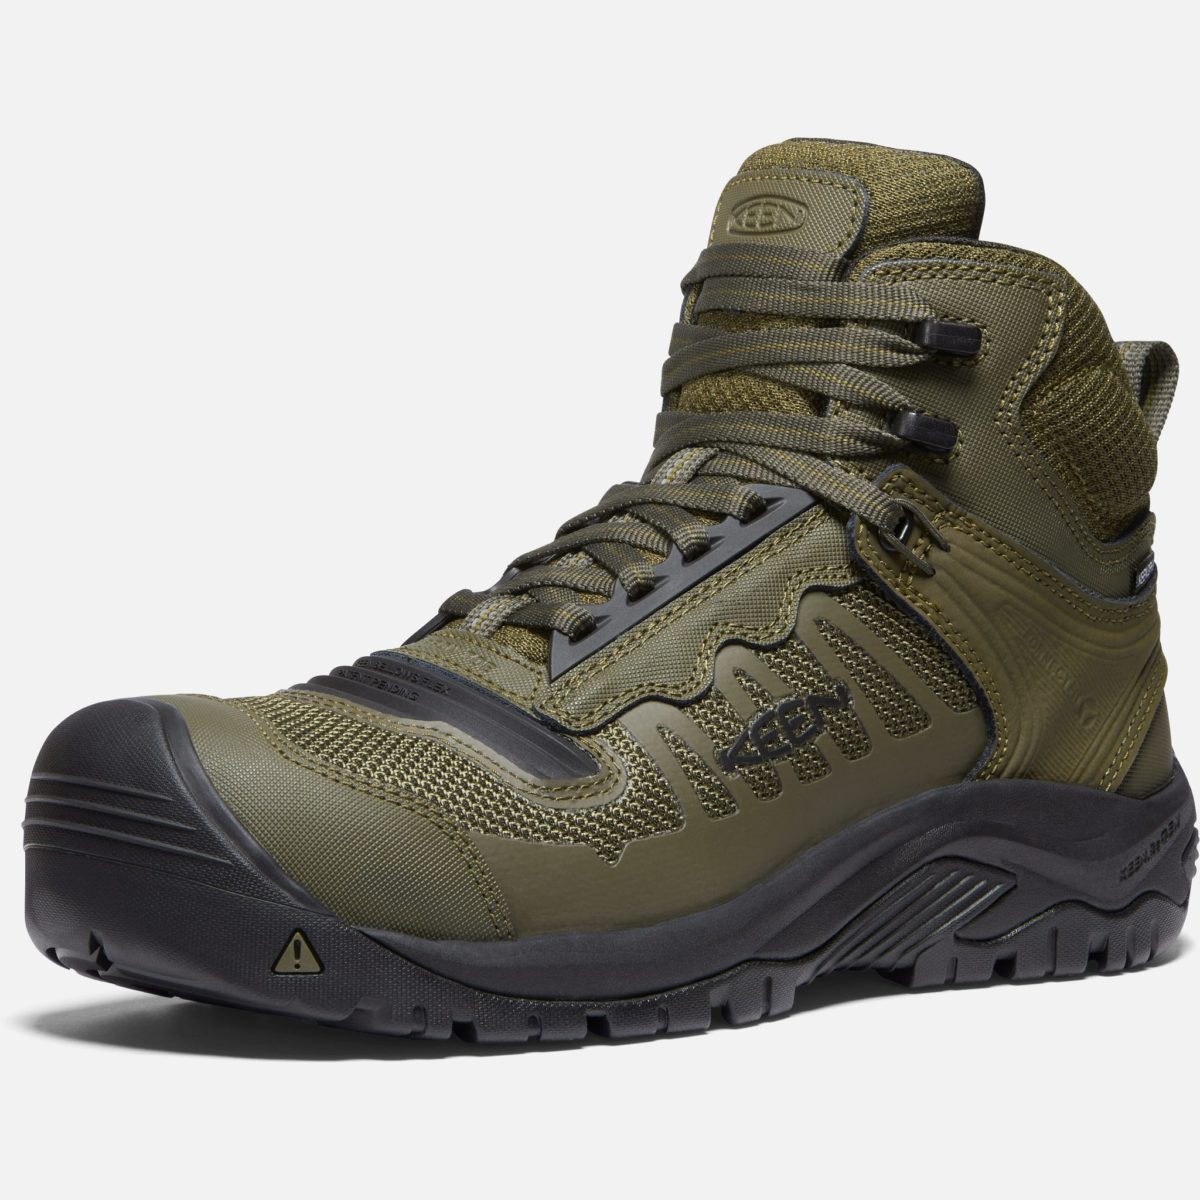 KEEN Utility introduces Reno, a lighter, faster work boot designed for the demands of the modern jobsite.